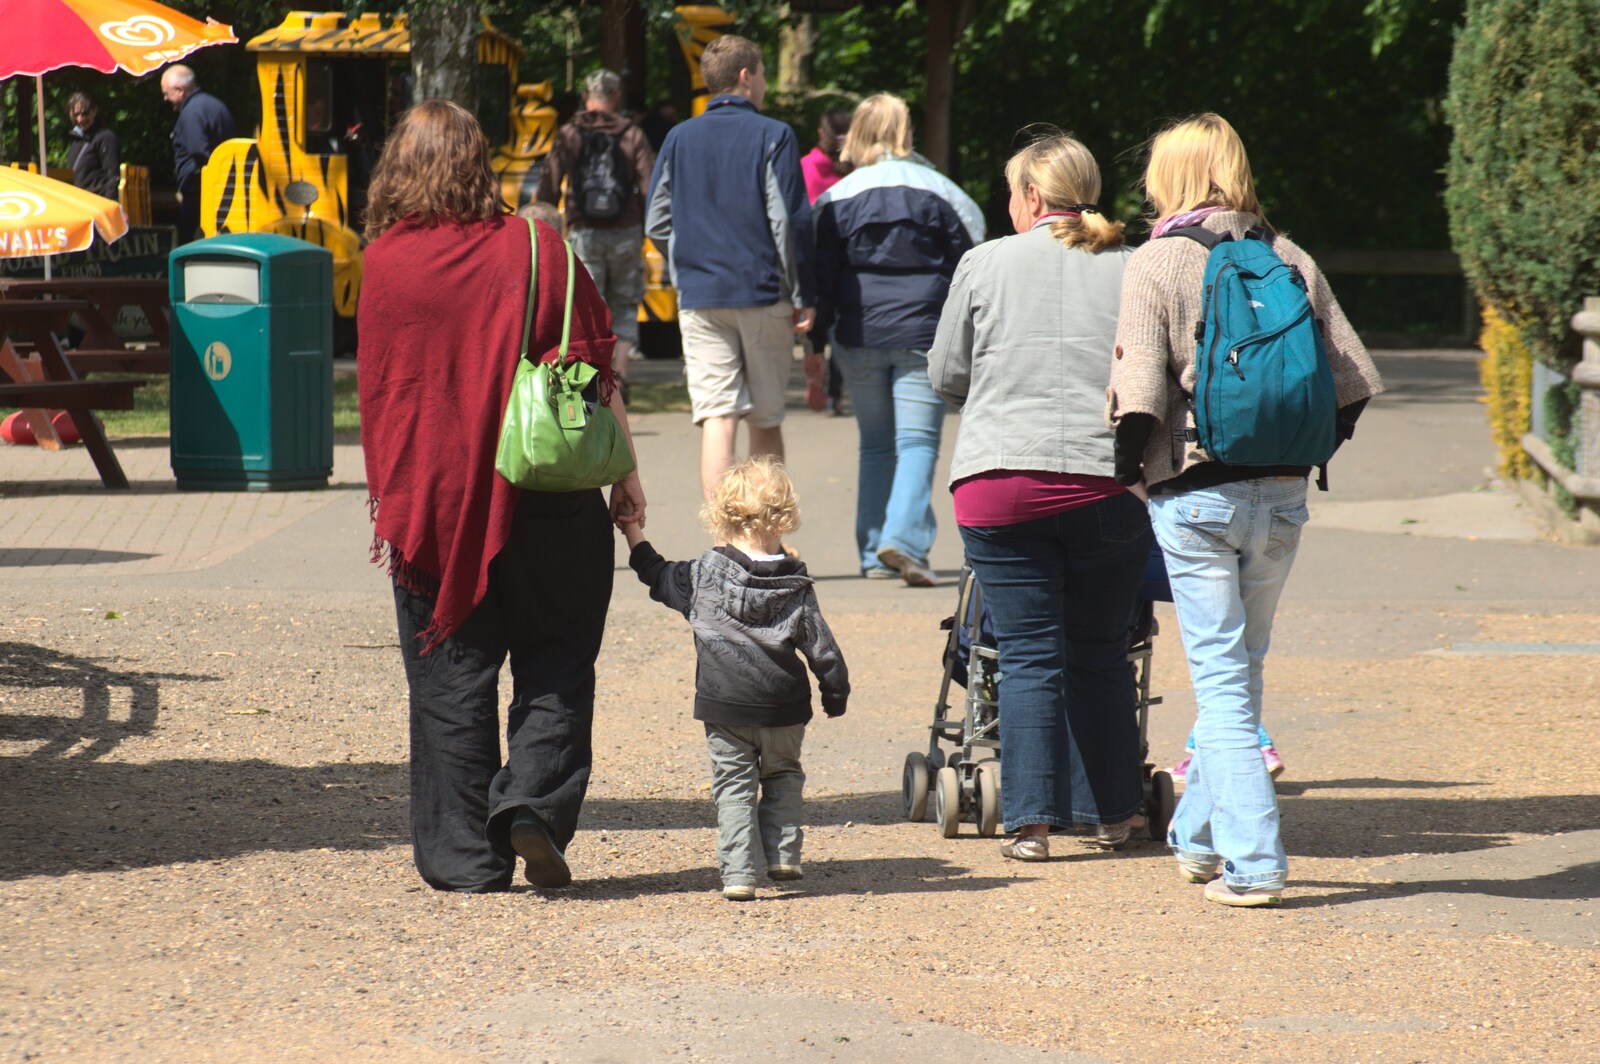 The Mommy Massive walk around Banham Zoo from Another Day at the Zoo, Banham, Norfolk - 2nd May 2011